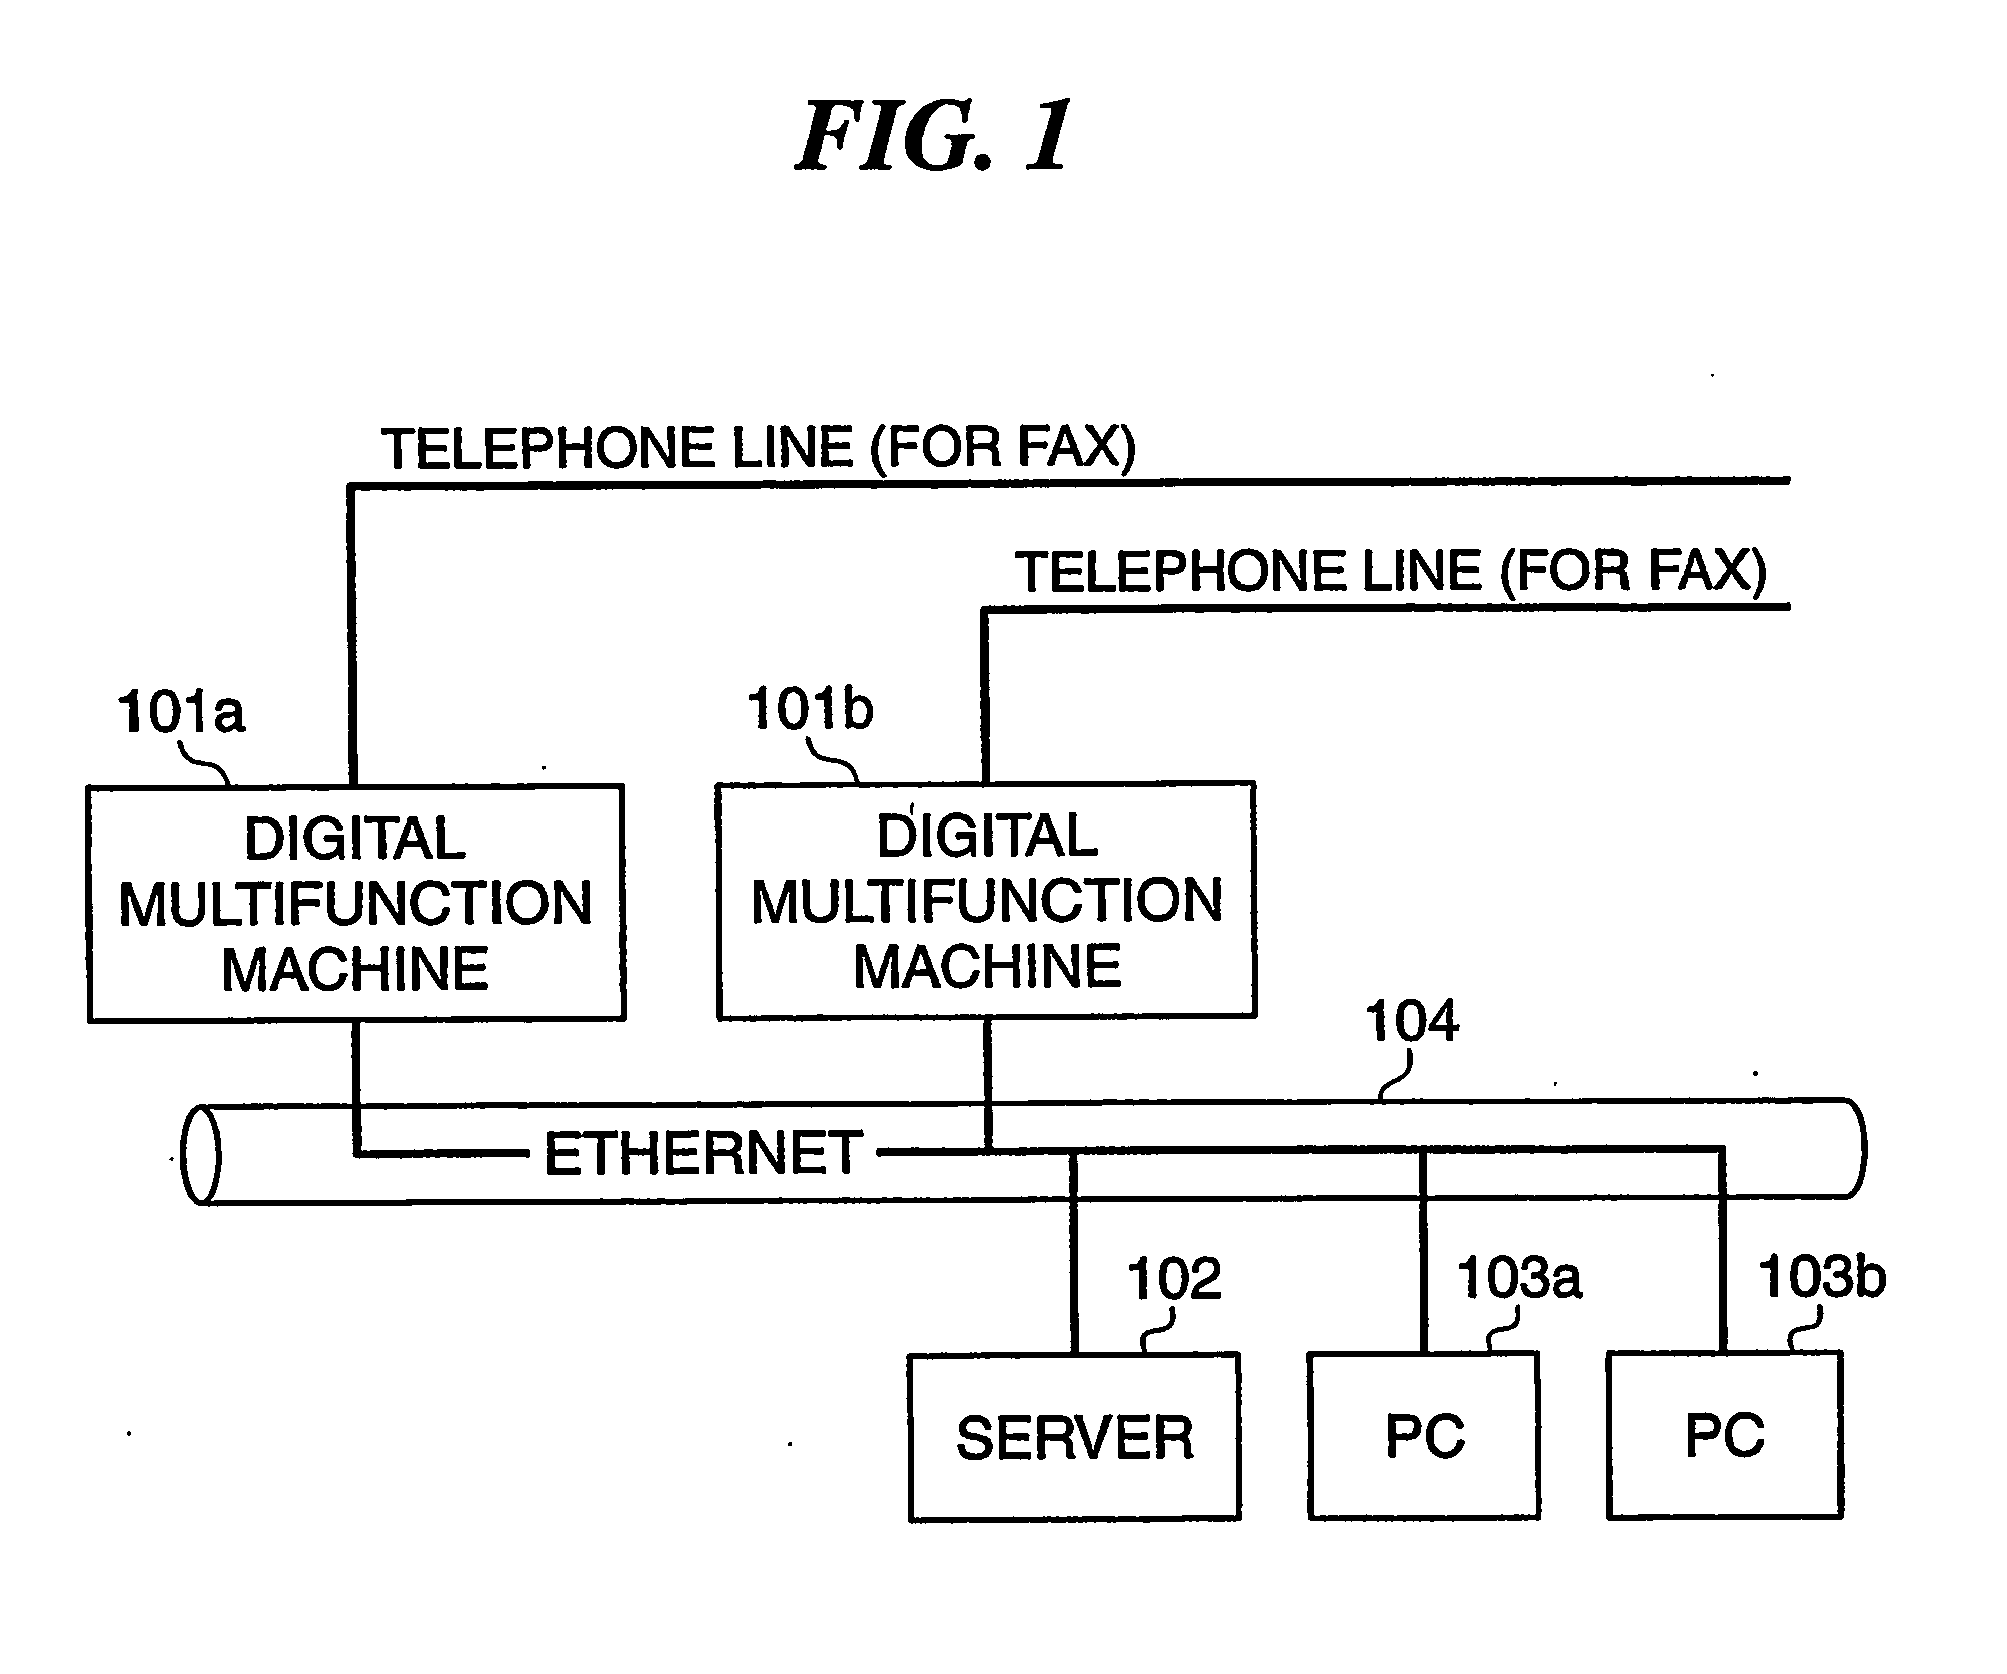 Image forming apparatus having reduced power consumption mode, control method therefor, network system including the image forming apparatus, and control method therefor